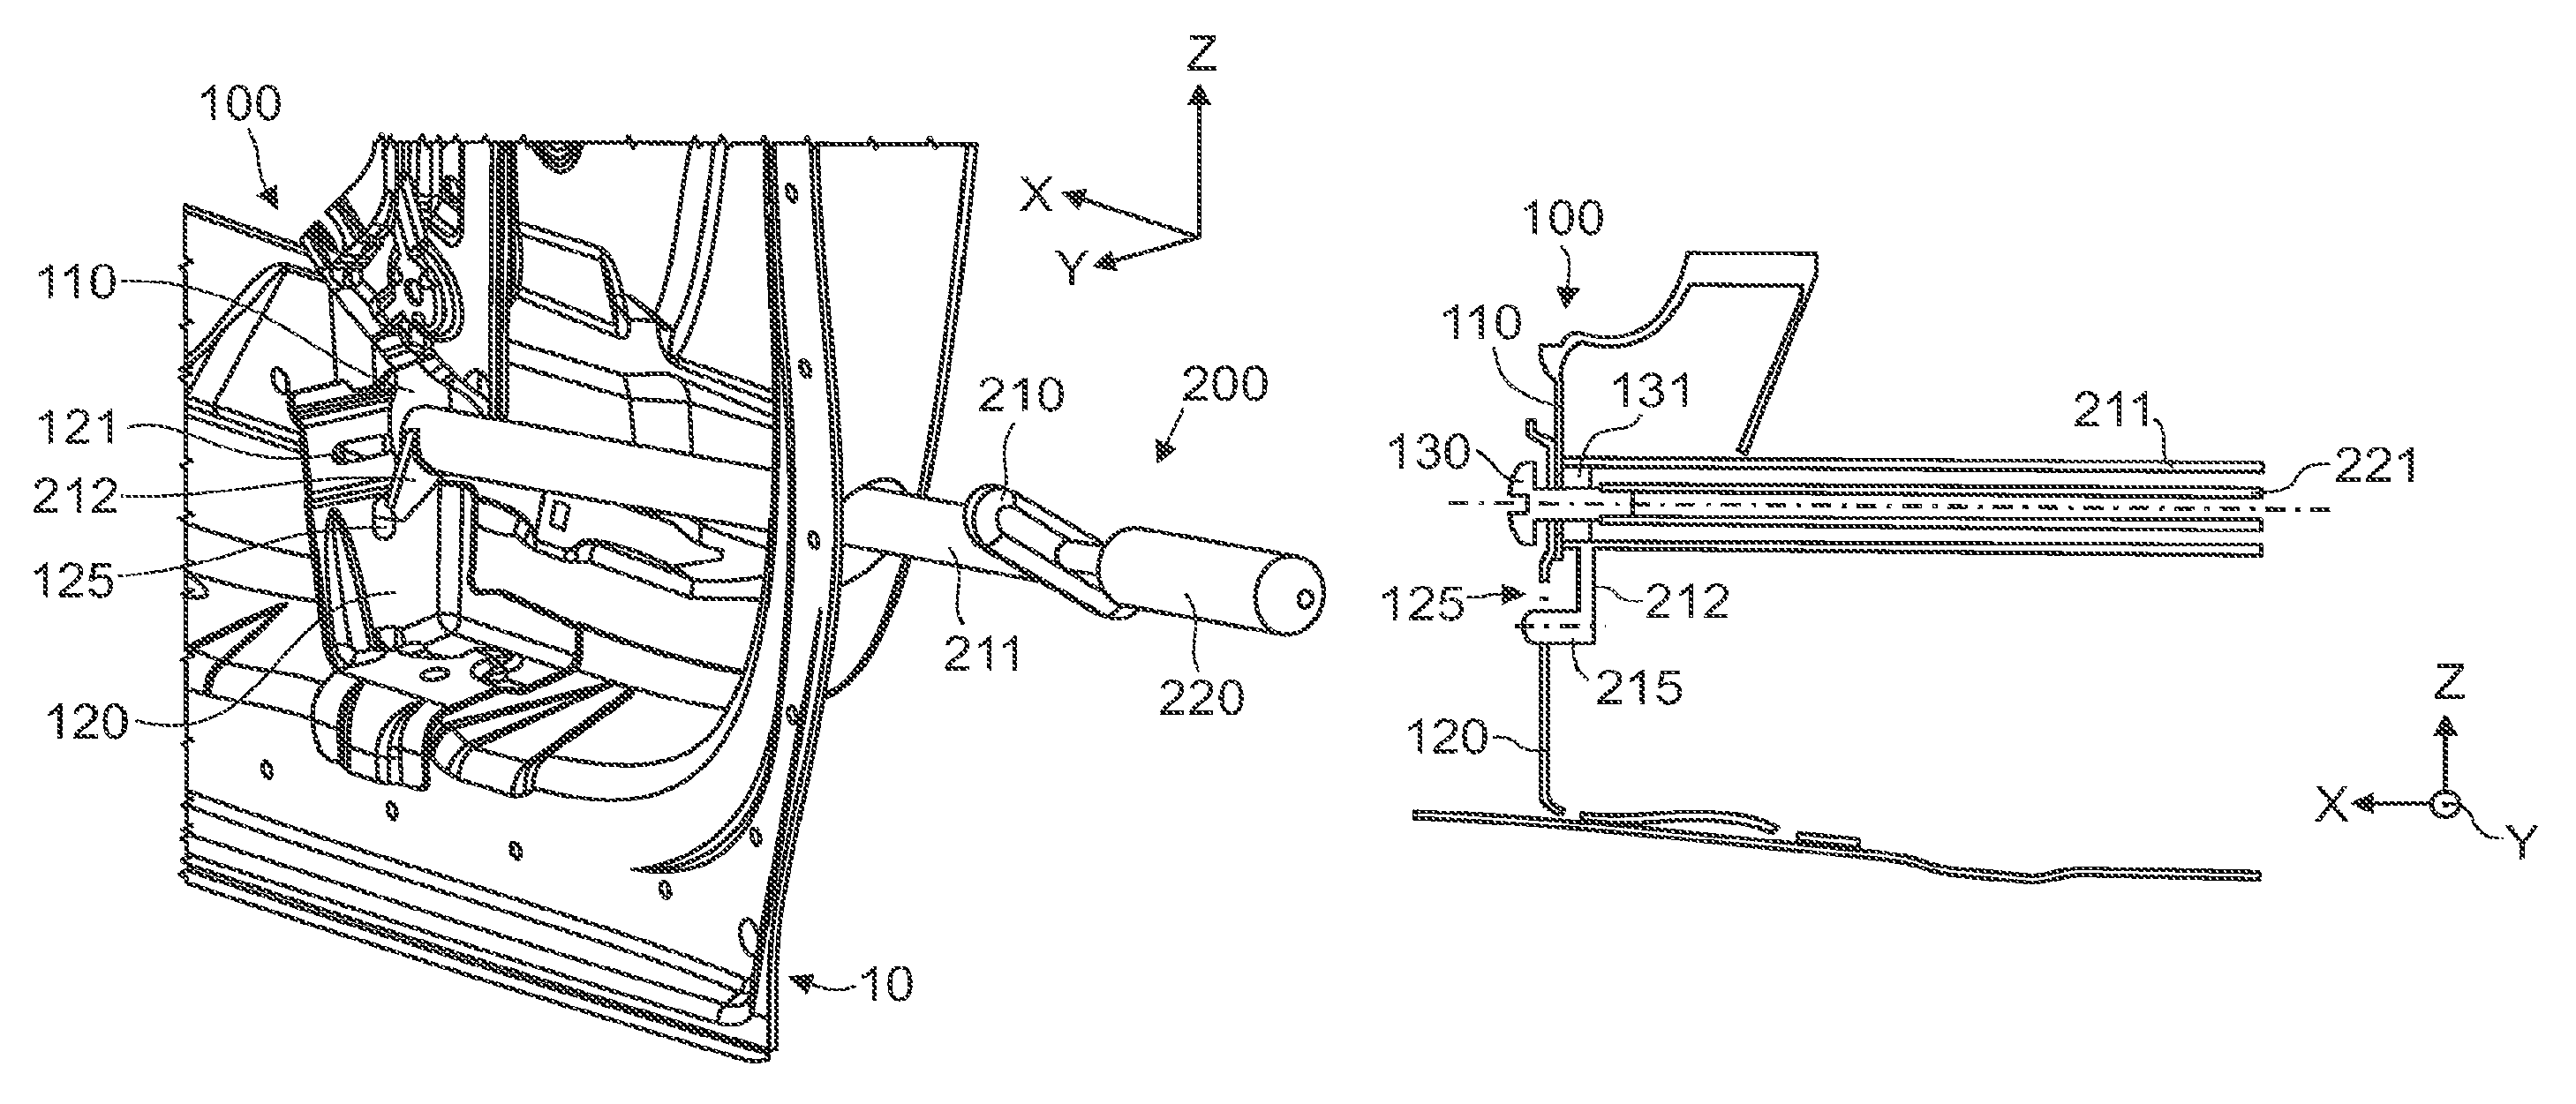 Device for adjusting and locking the position of a guide rail for a movable windowpane in a vehicle door